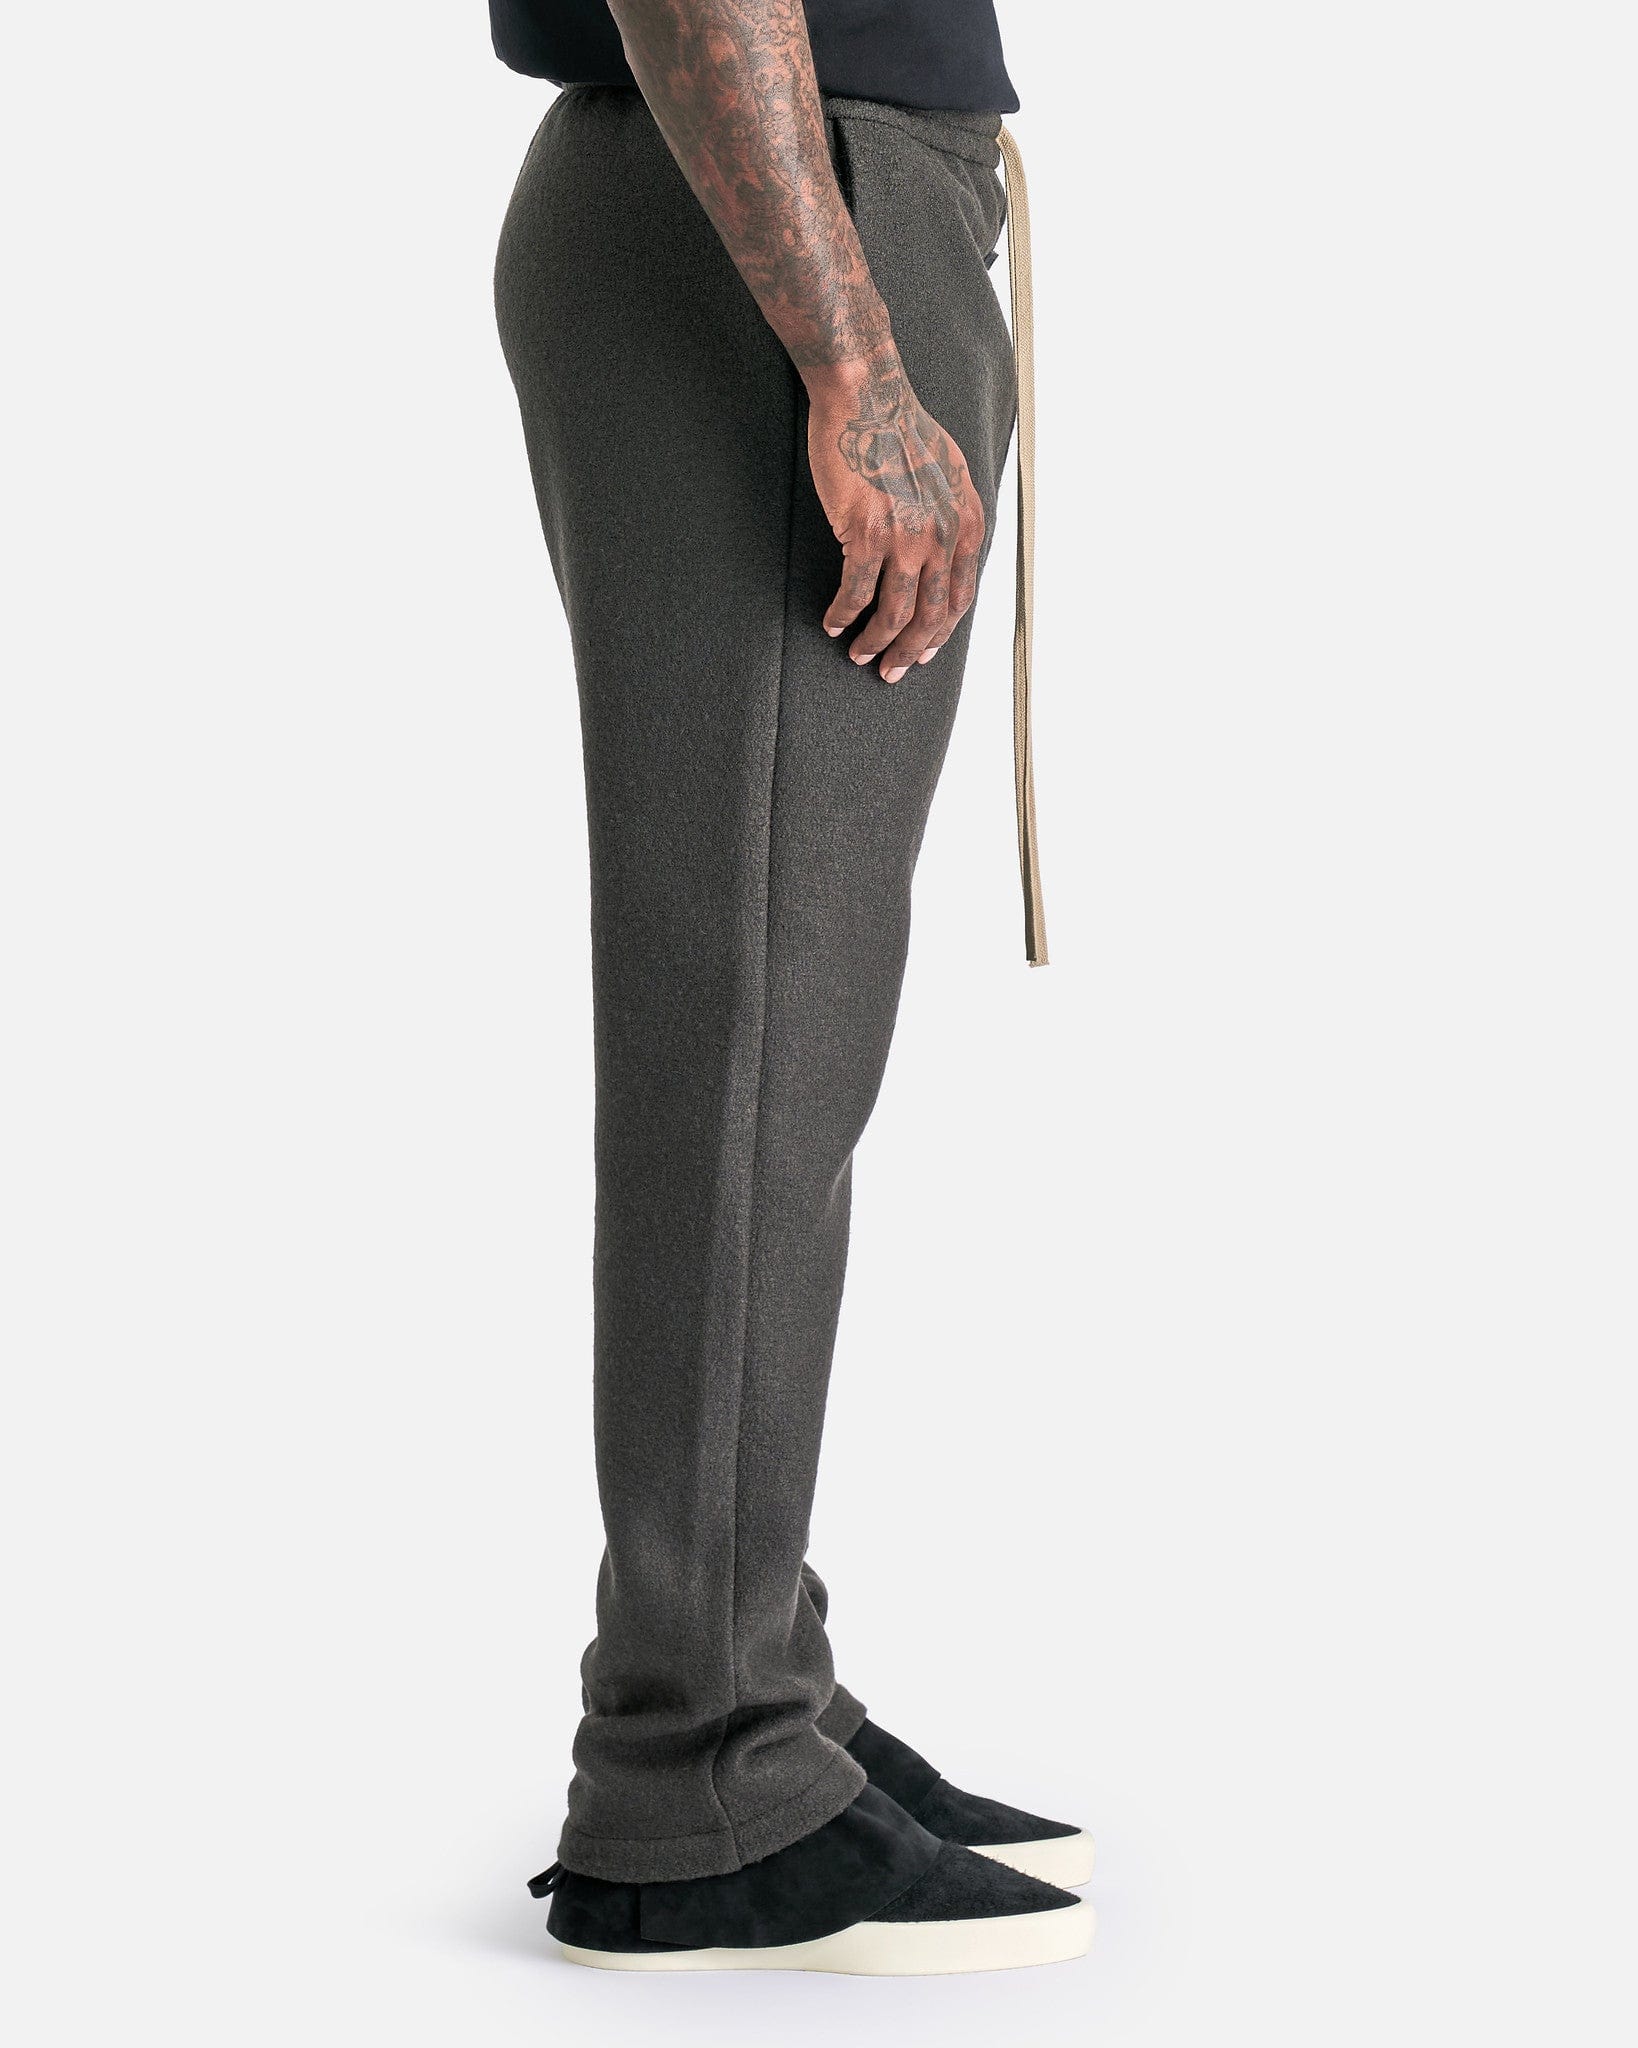 Fear of God Men's Pants Forum Pant in Forest